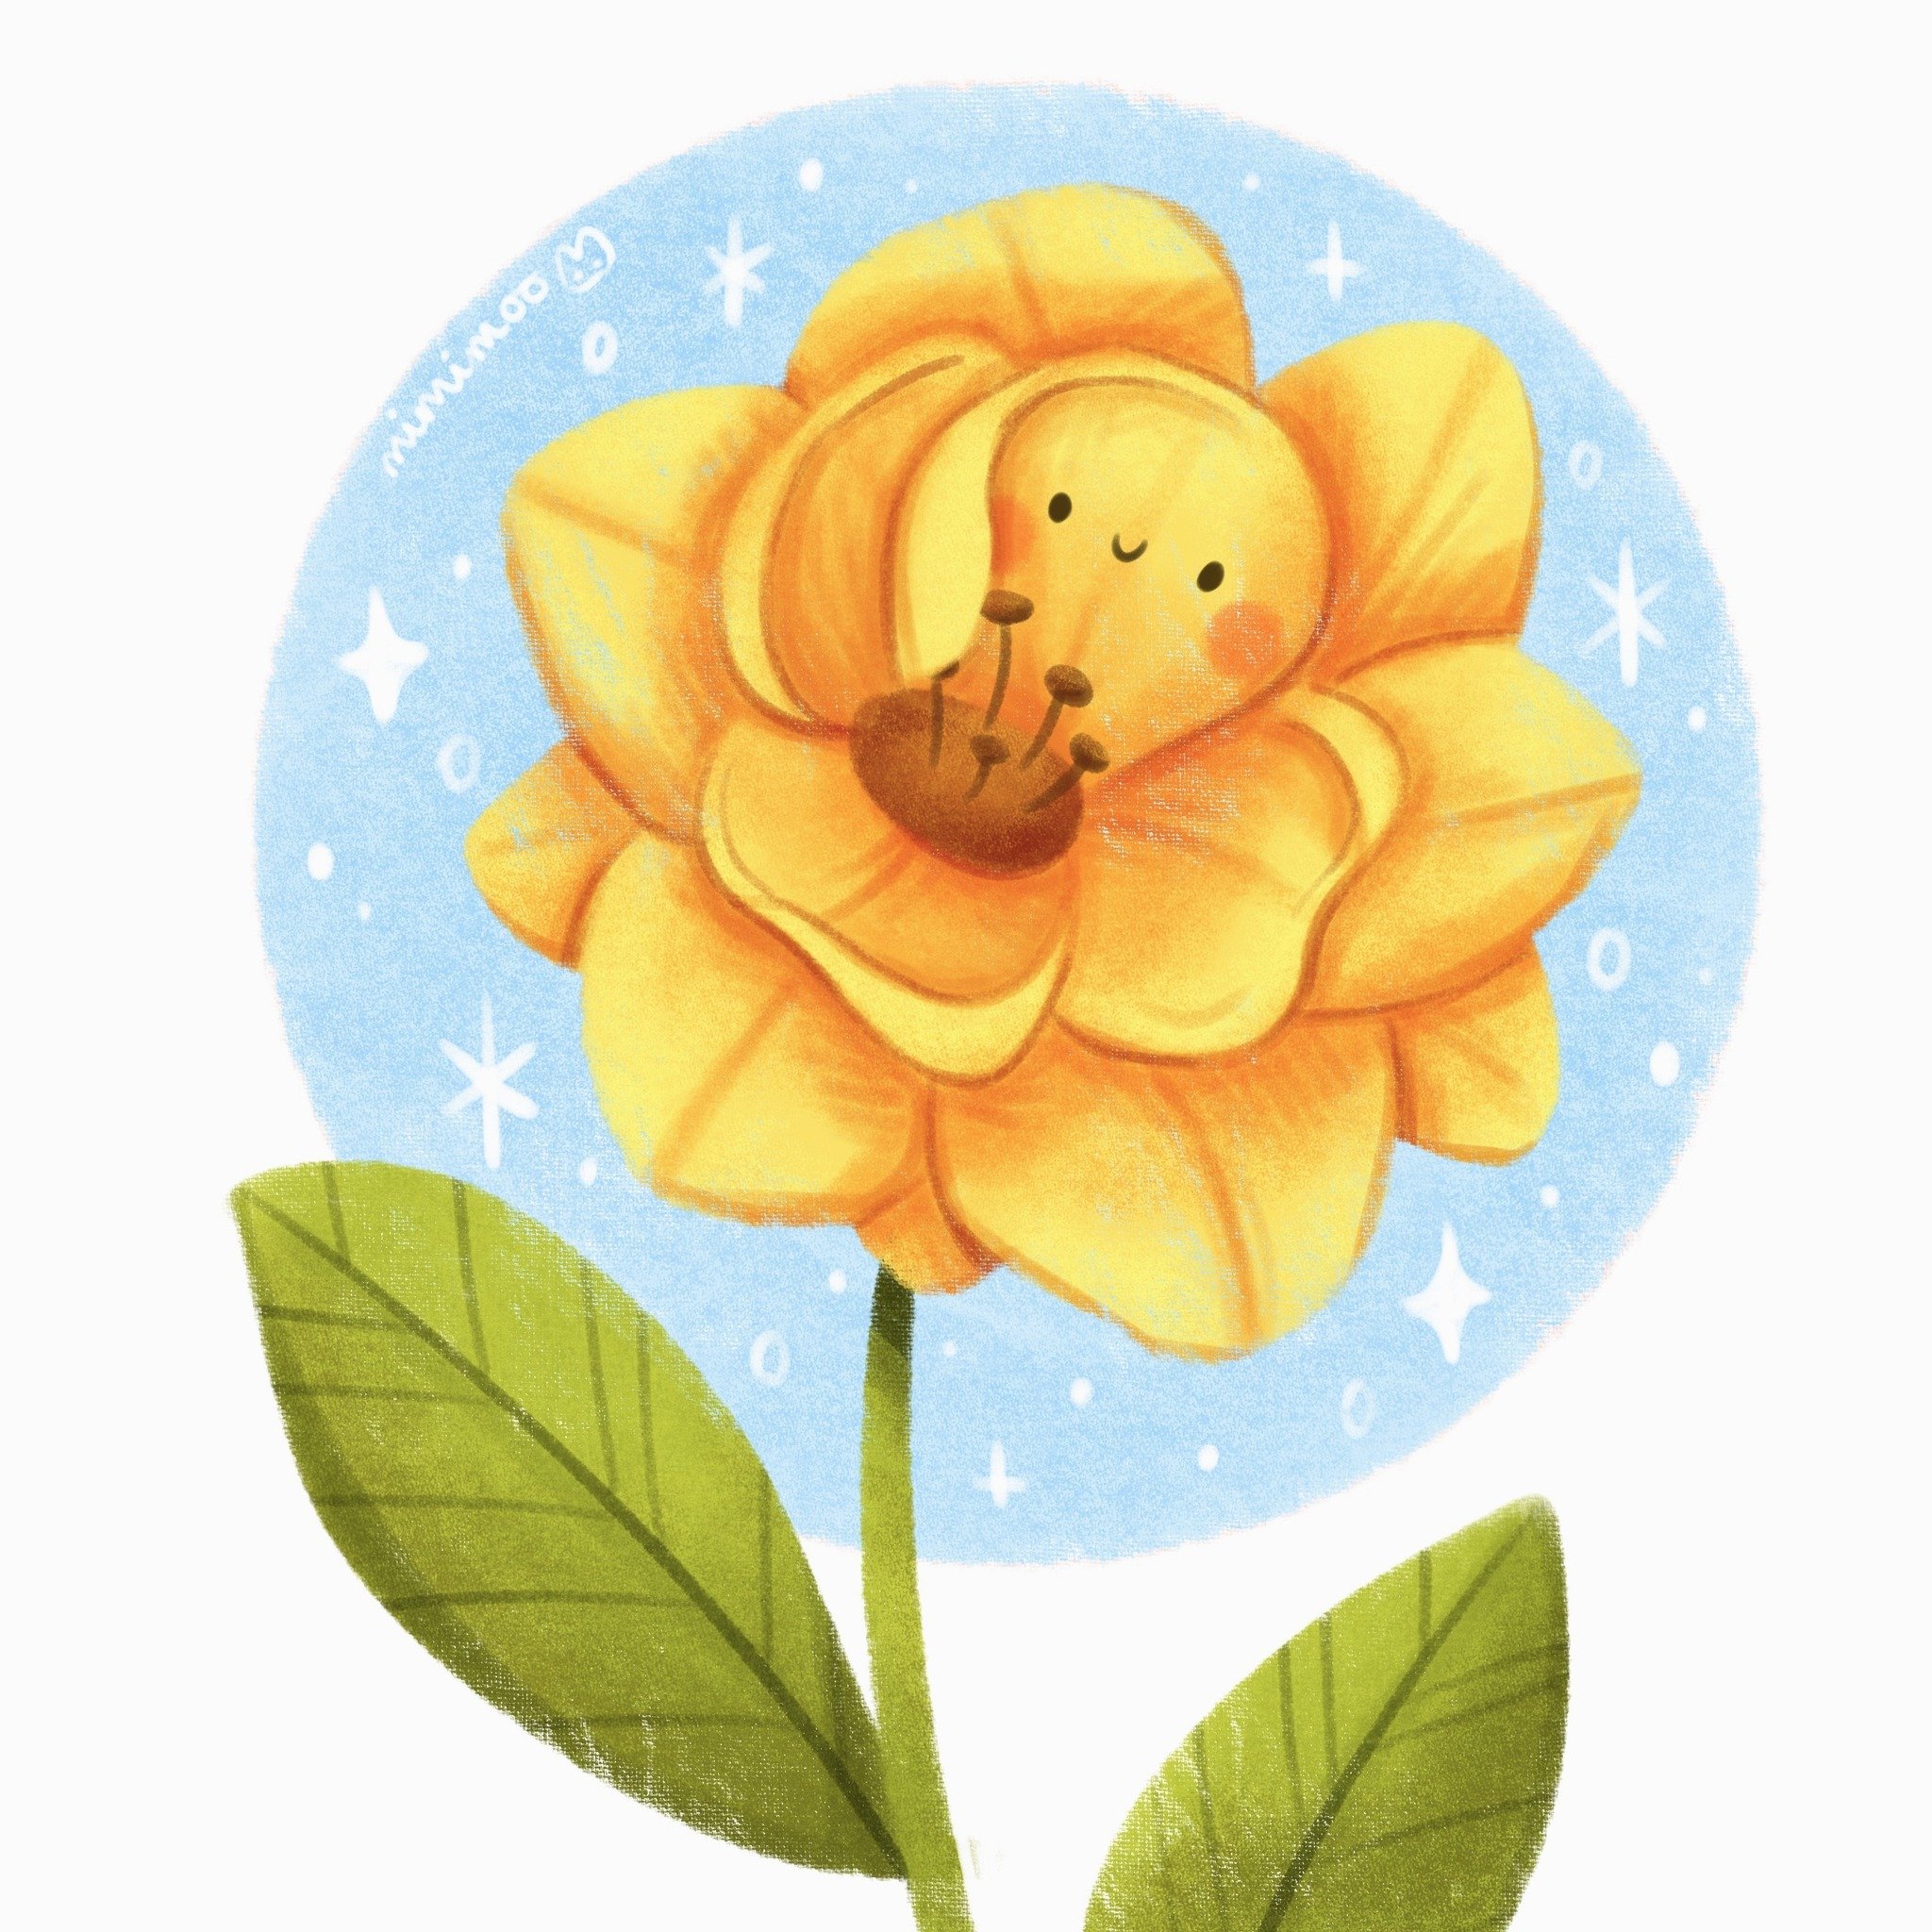 Continuing the flower theme with a happy yellow rose (let's be honest though, do I ever draw anything else but flowers) 😄☀️✨

Brushes I used (from my brush packs):
🌷 Mimi Simple Sketching for initial sketch
🌷 Mimi Canvas Brush for colouring shapes